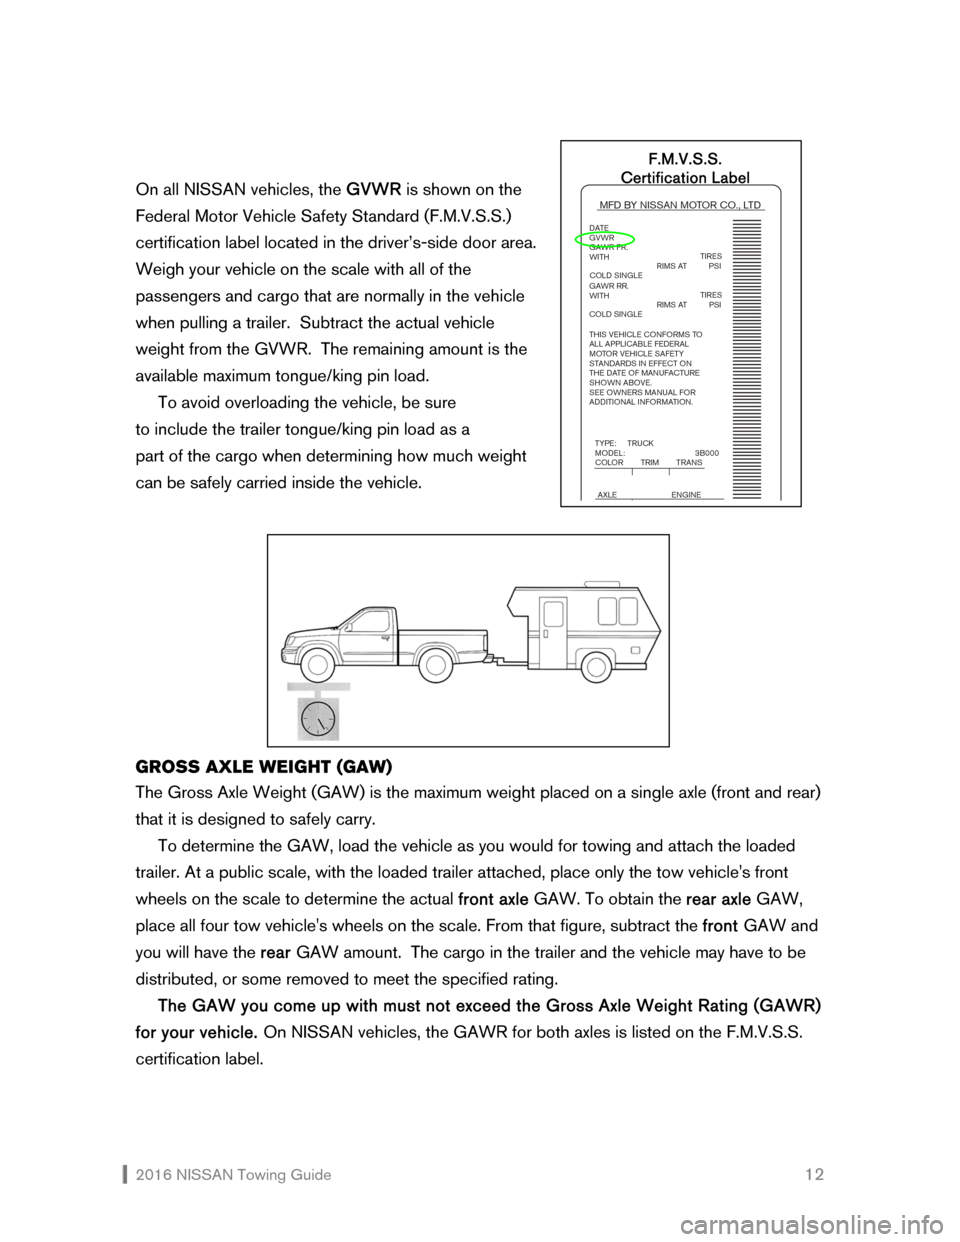 NISSAN GT-R 2016 R35 Towing Guide  2016 NISSAN Towing Guide    12  
On all NISSAN vehicles, the GVWR is shown on the  
Federal Motor Vehicle Safety Standard (F.M.V.S.S.) 
certification label located in the driver’s-side door area.  